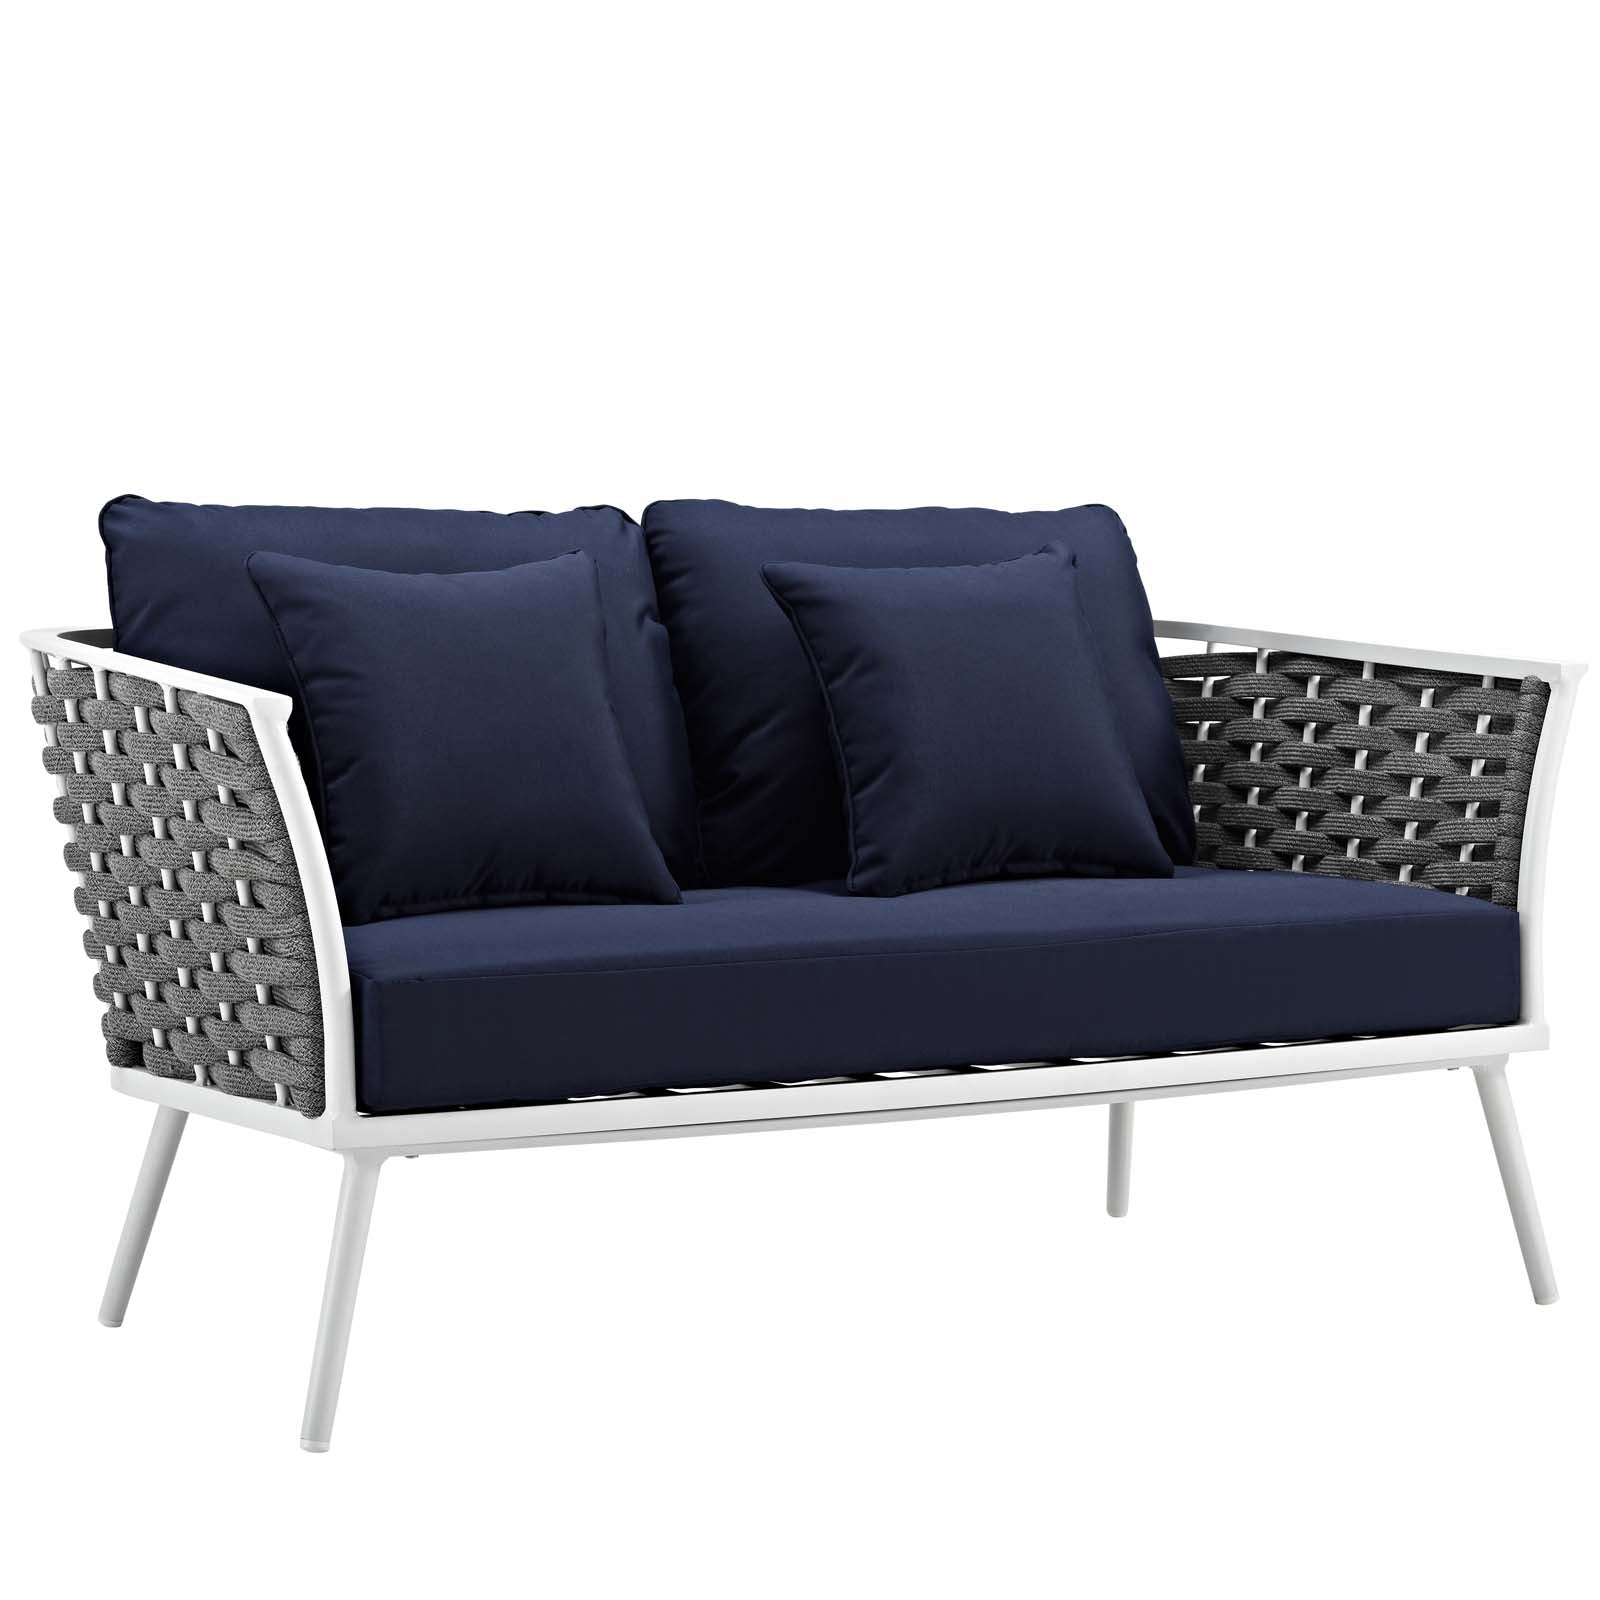 Stance 7 Piece Outdoor Patio Aluminum Sectional Sofa Set - East Shore Modern Home Furnishings